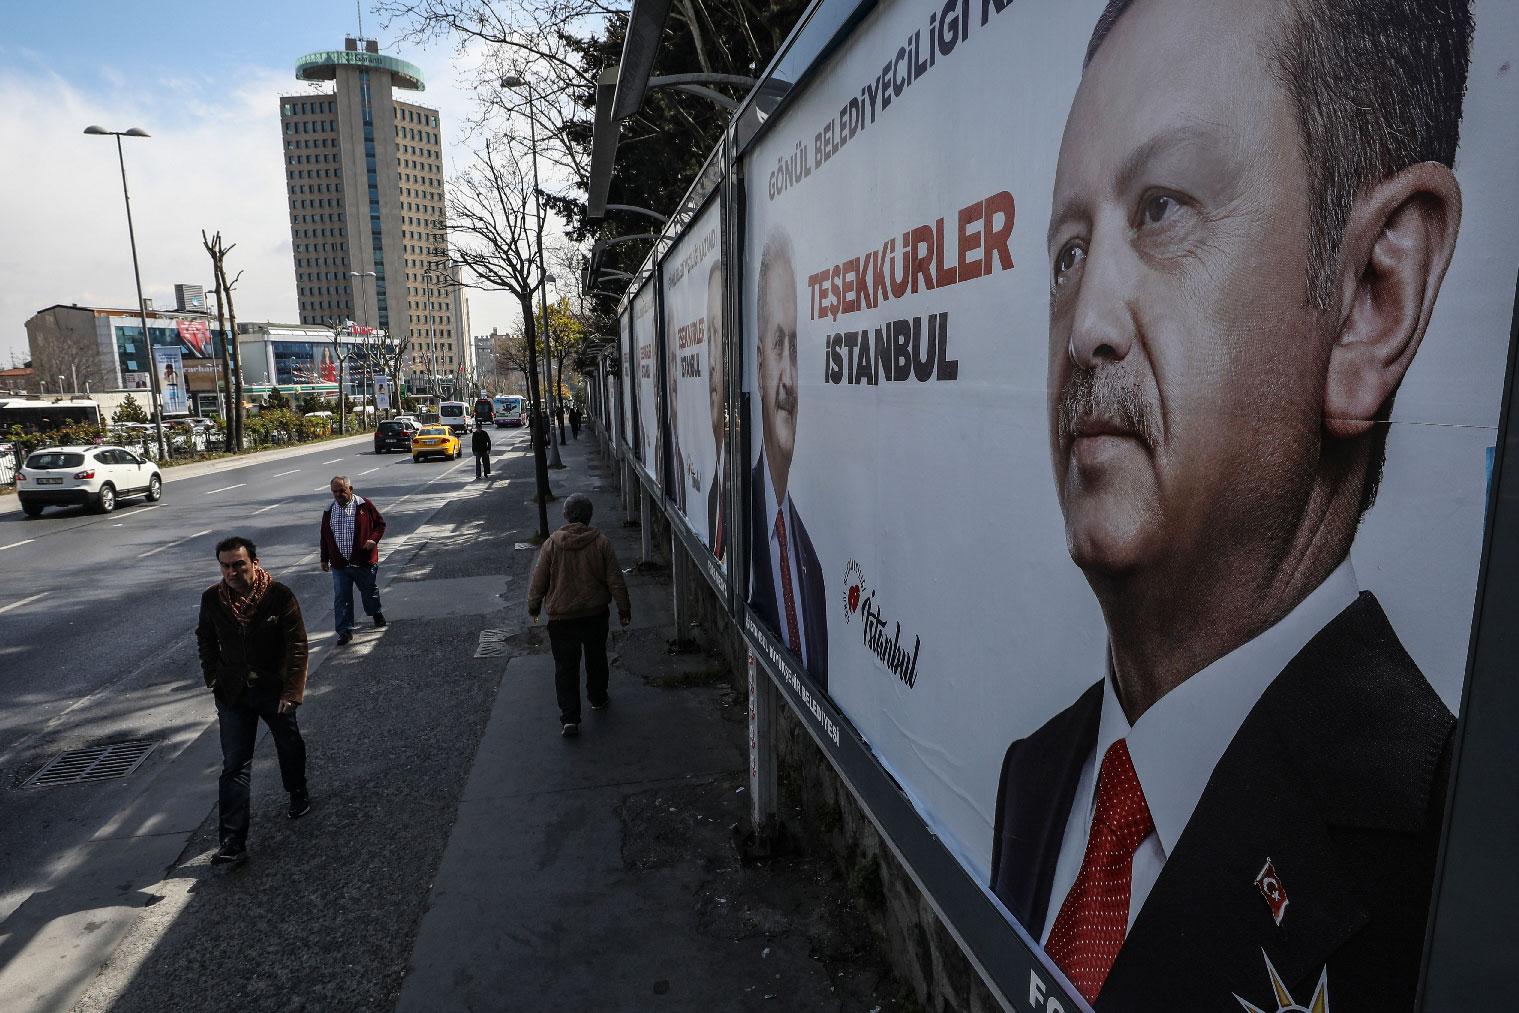 People walk past posters showing Turkey's President Recep Tayyip Erdogan and Binali Yildirim, the mayoral candidate for Istanbul of the ruling Justice and Development Party (AKP) a day after the local elections in Istanbul, Monday, April 1, 2019.